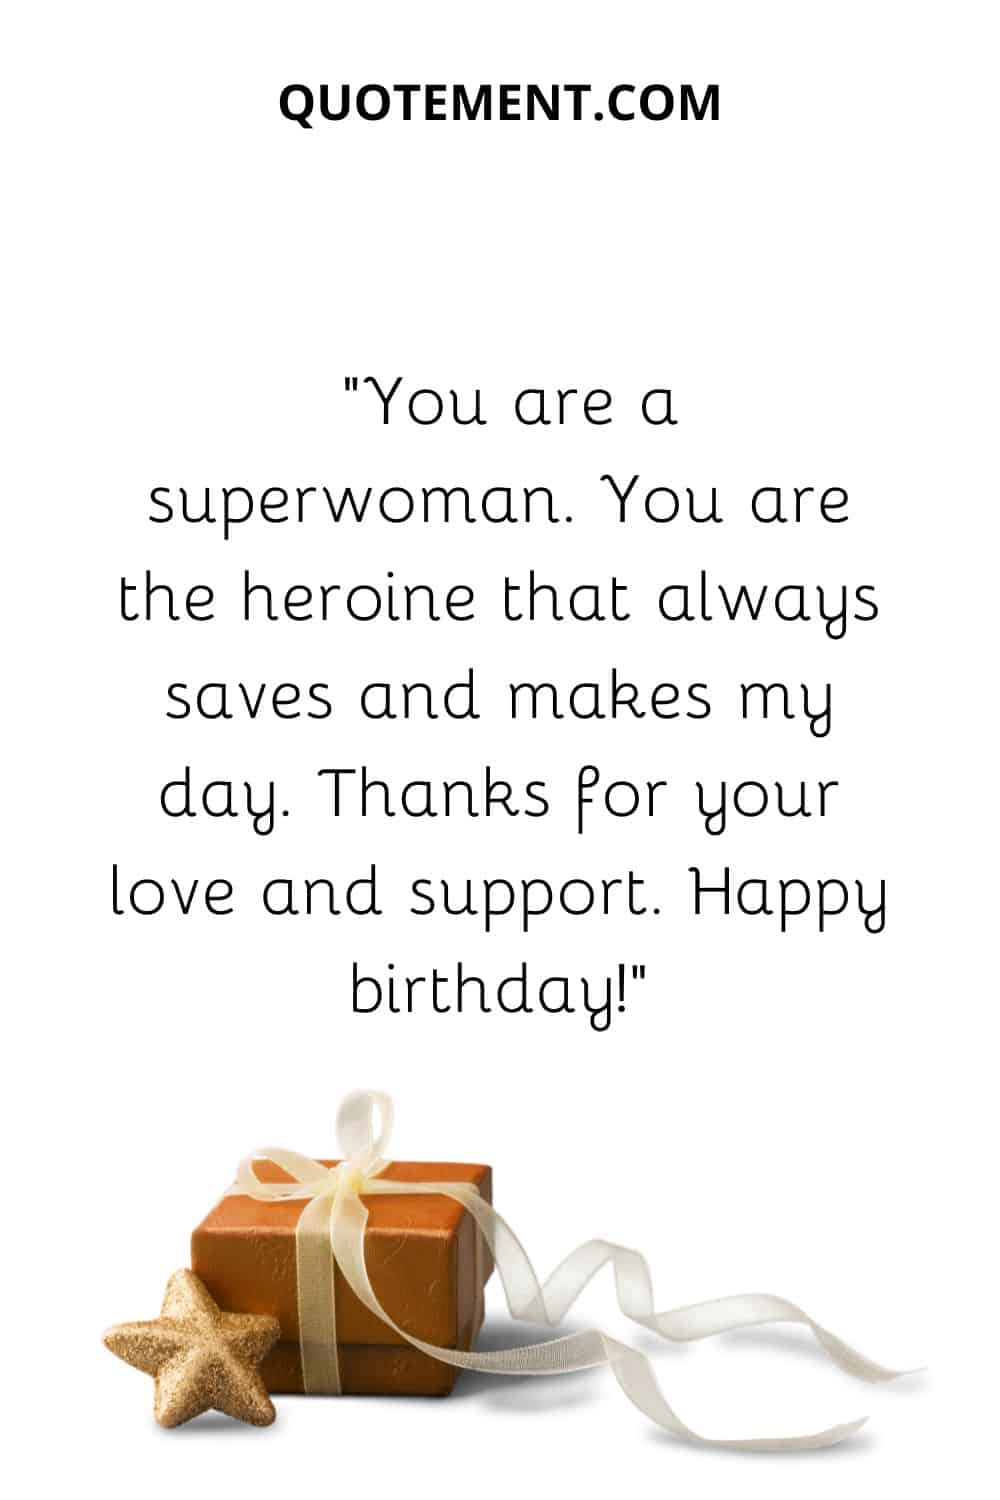 You are a superwoman